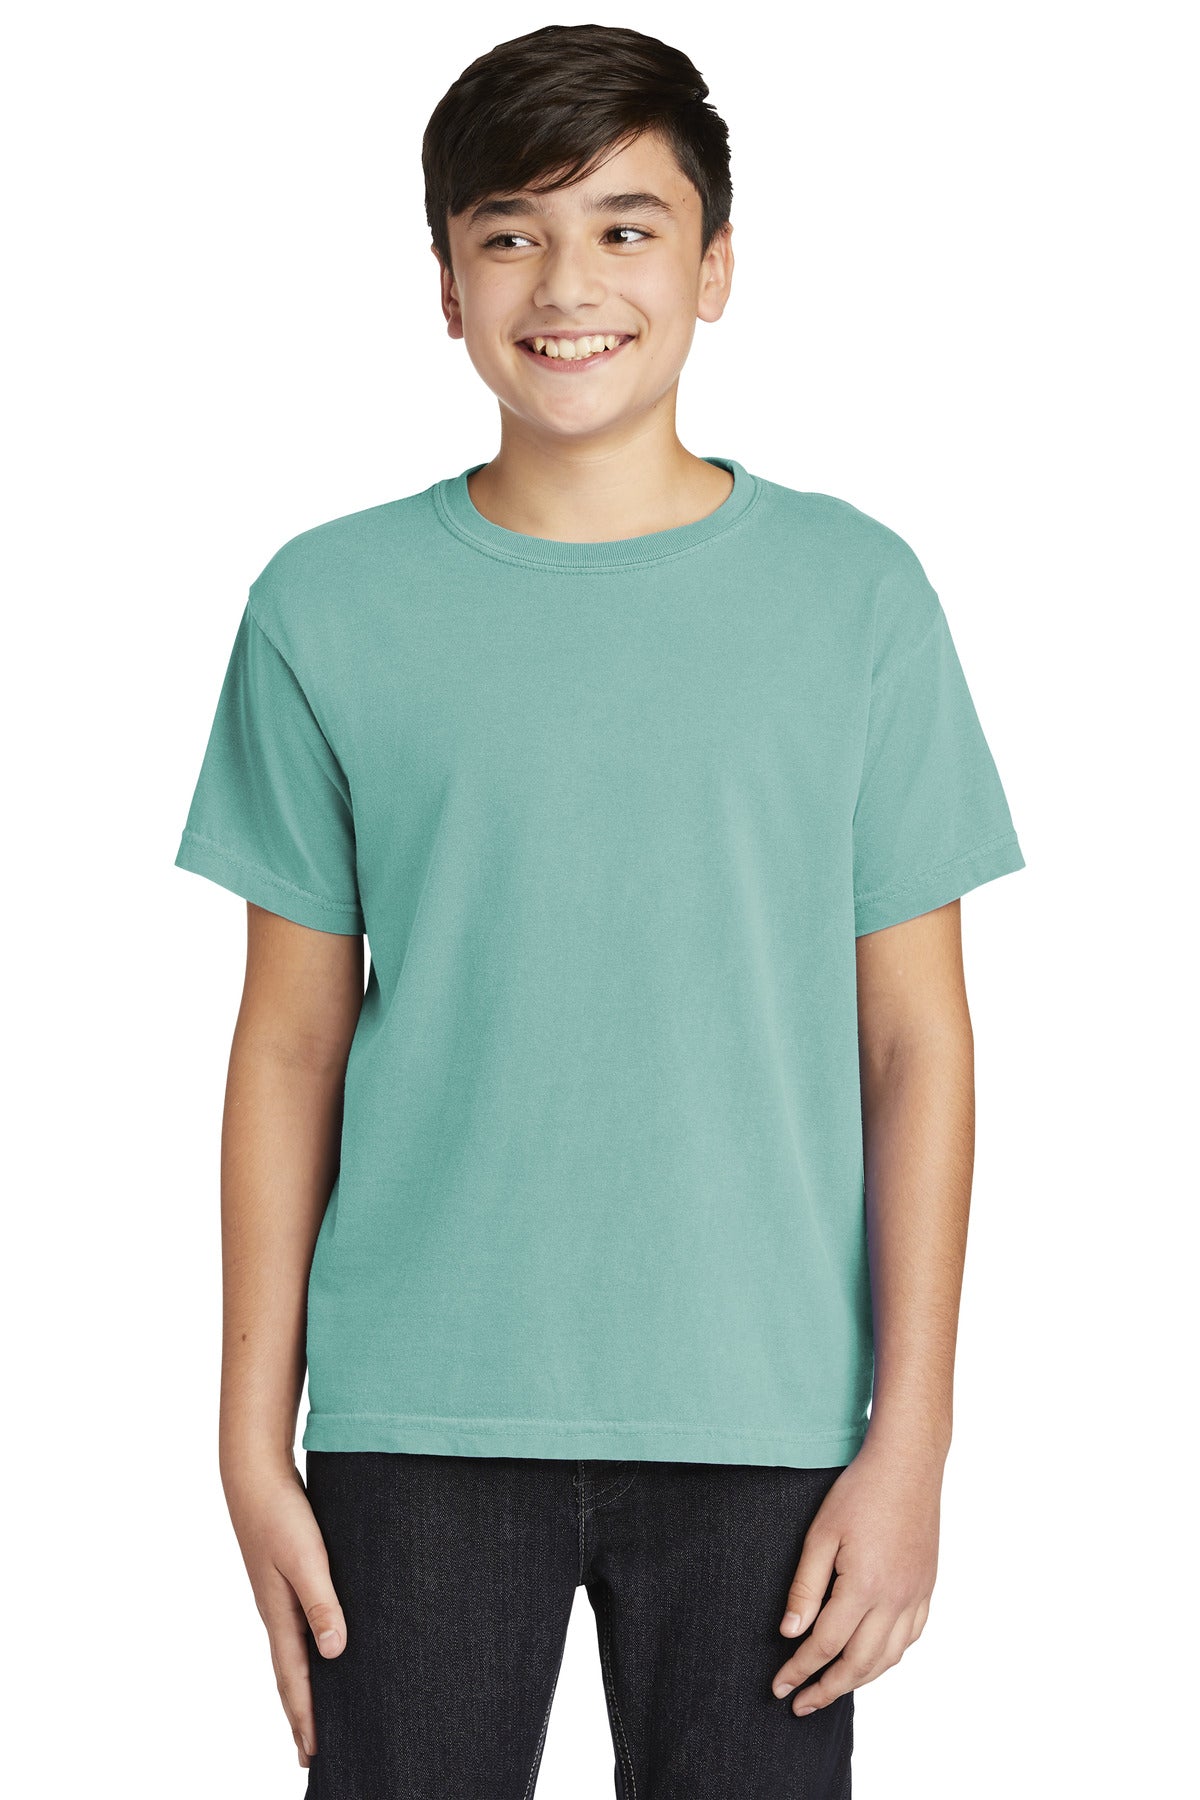 COMFORT COLORS ® Youth Heavyweight Ring Spun Tee. 9018